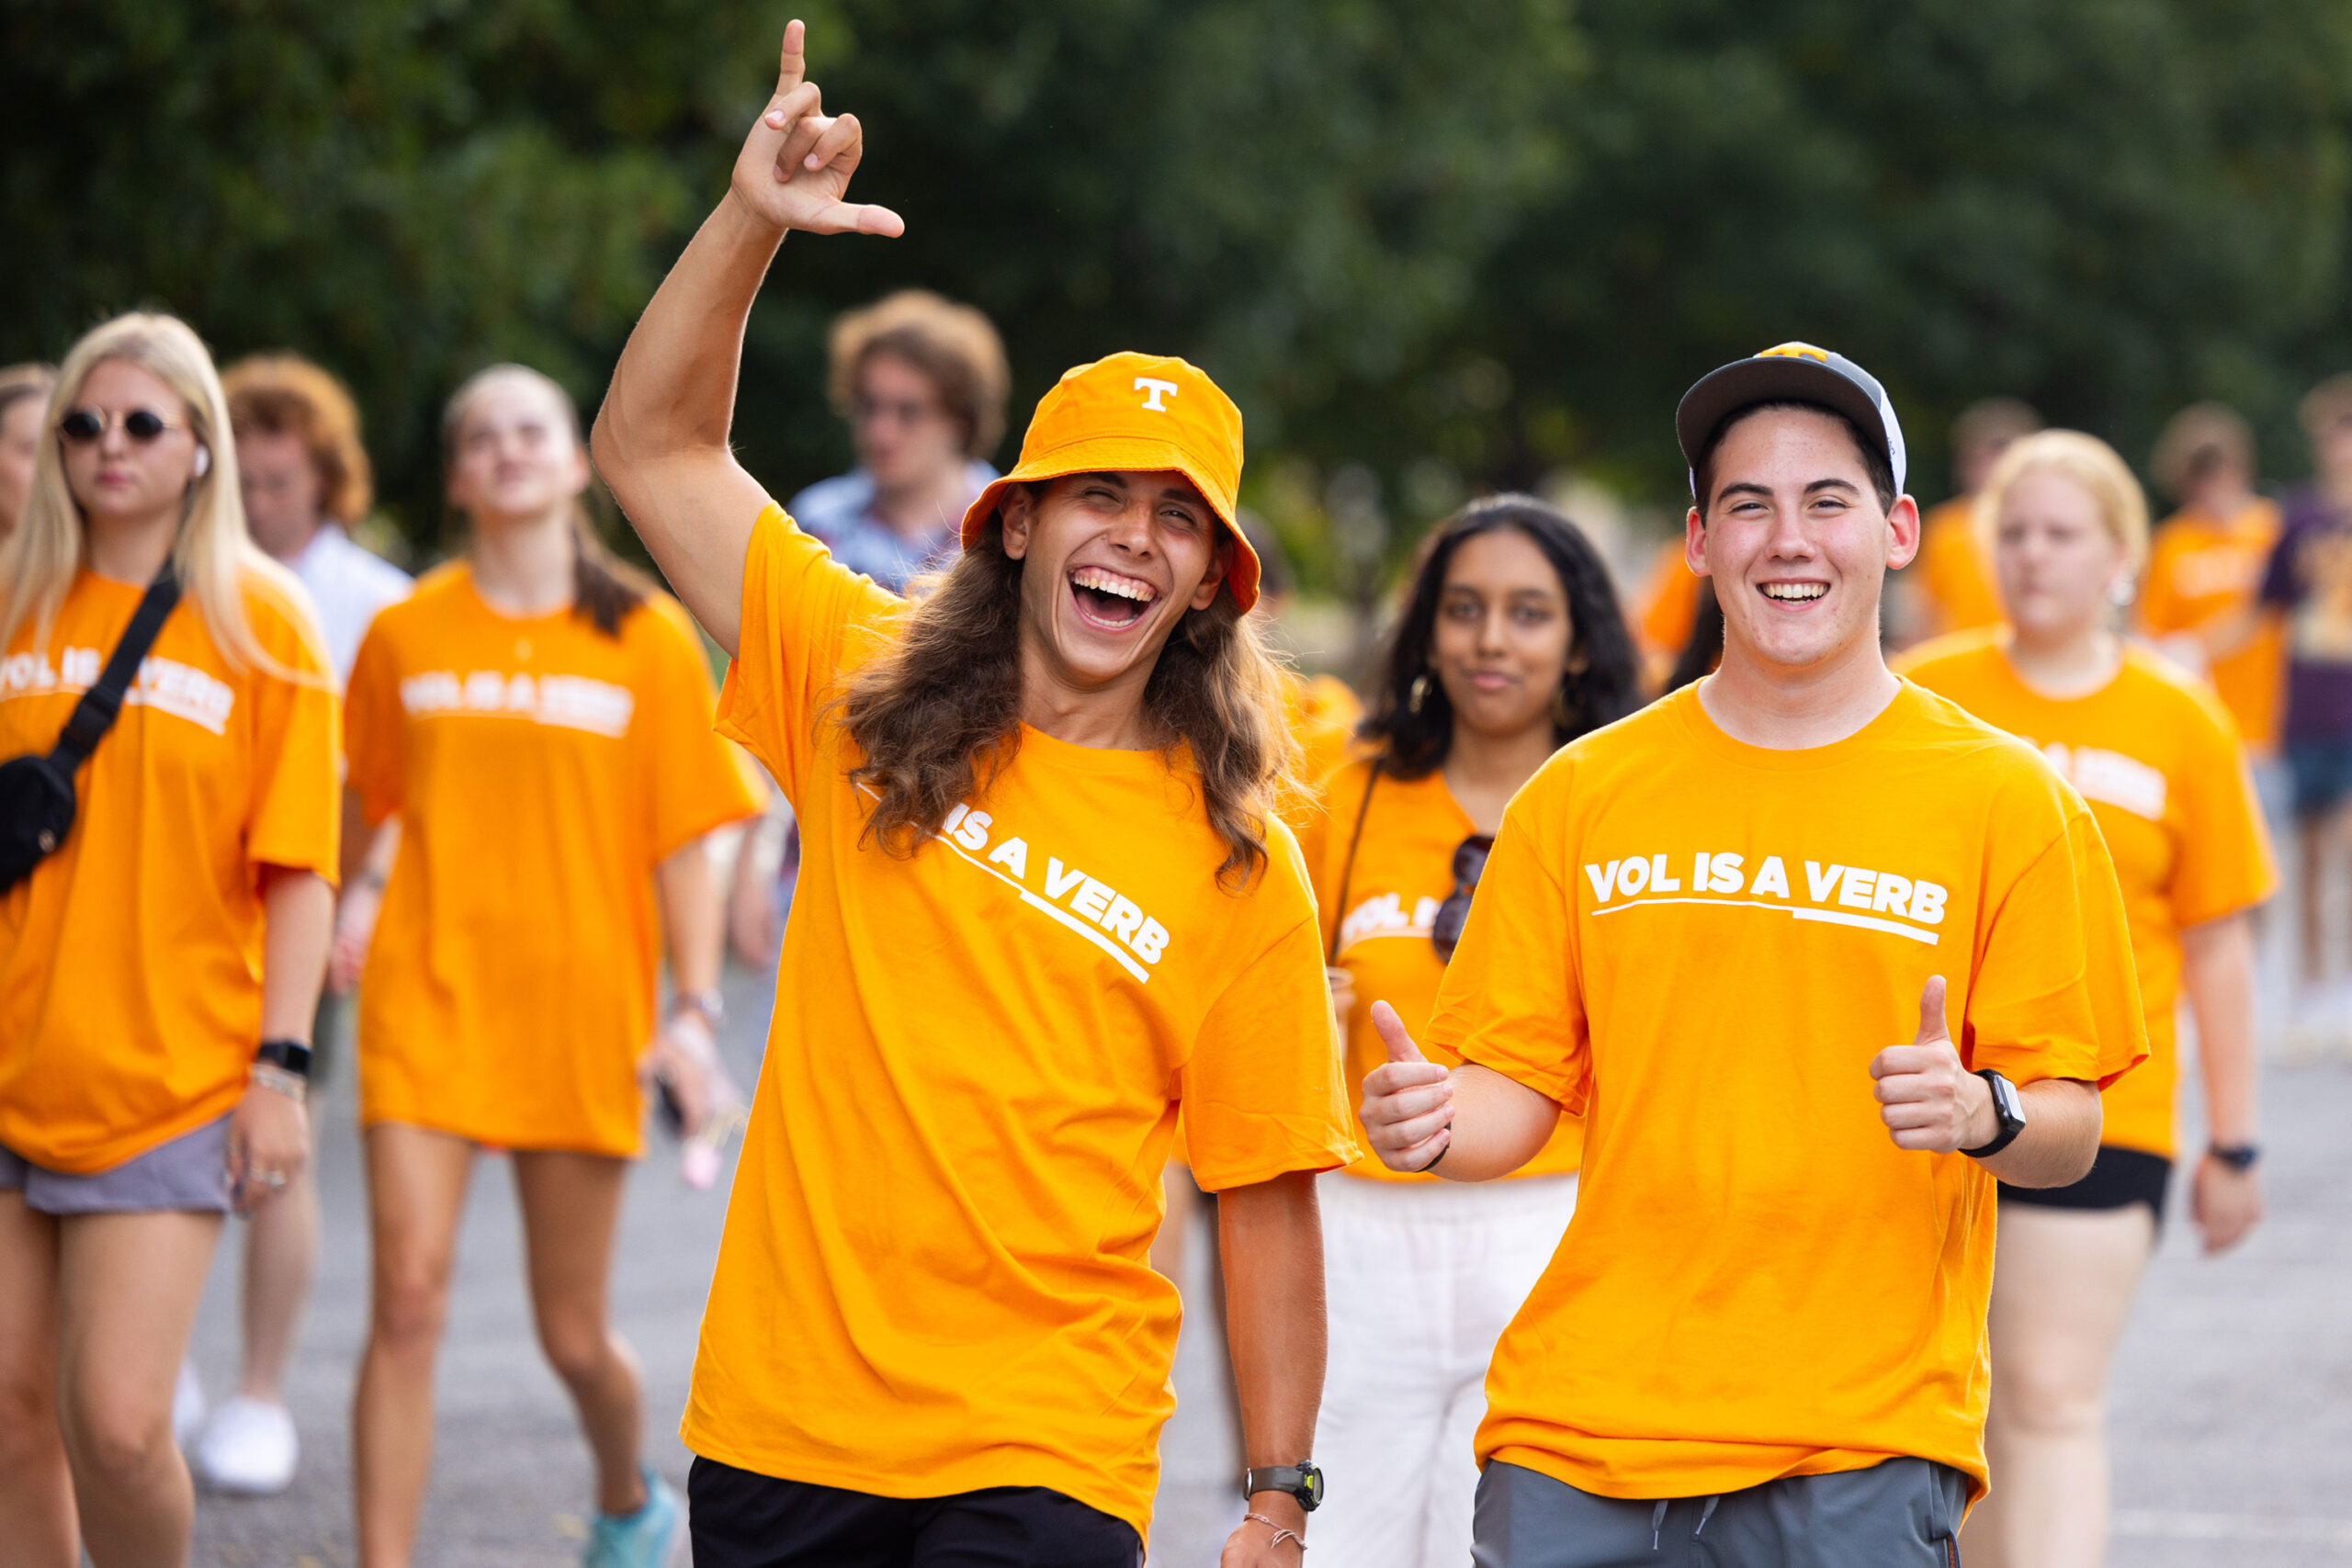 A group of students wearing orange vol is a verb shirts excitedly walk around campus